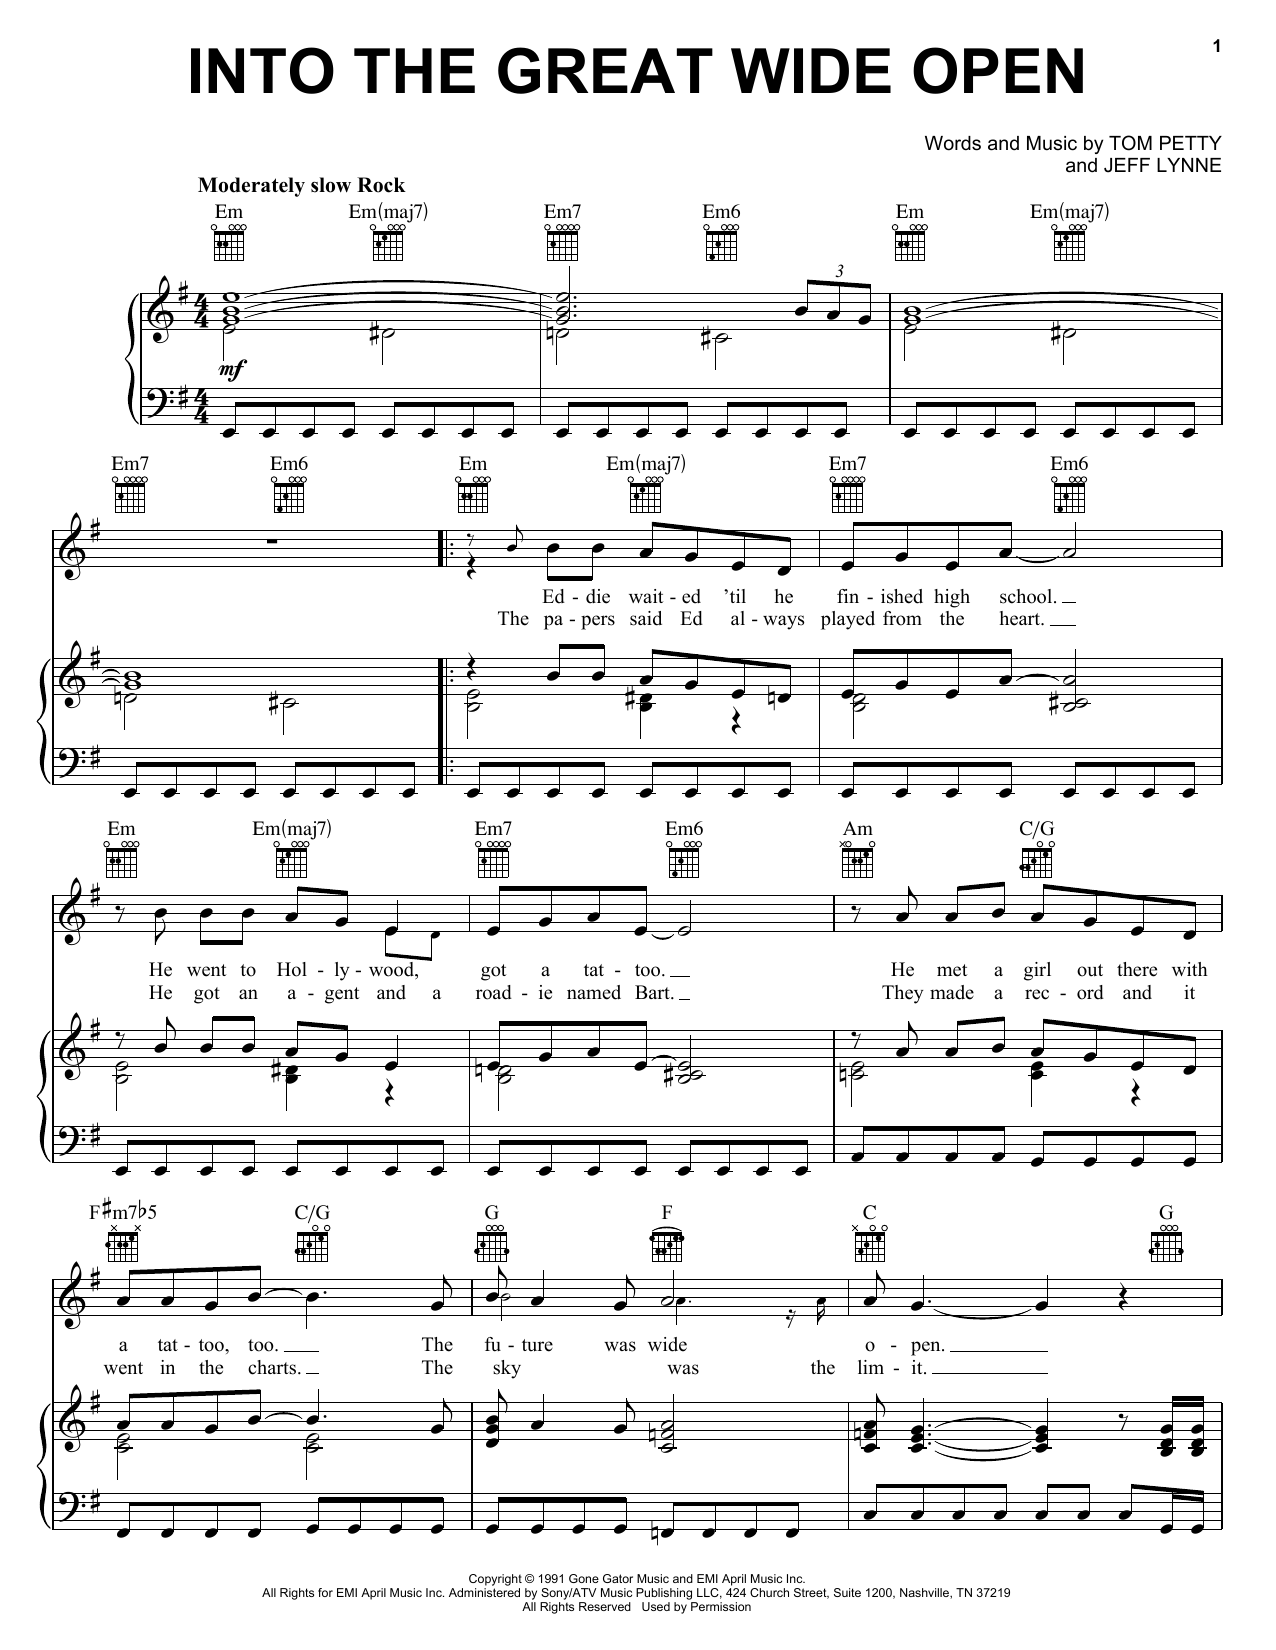 Tom Petty And The Heartbreakers Into The Great Wide Open sheet music notes and chords. Download Printable PDF.